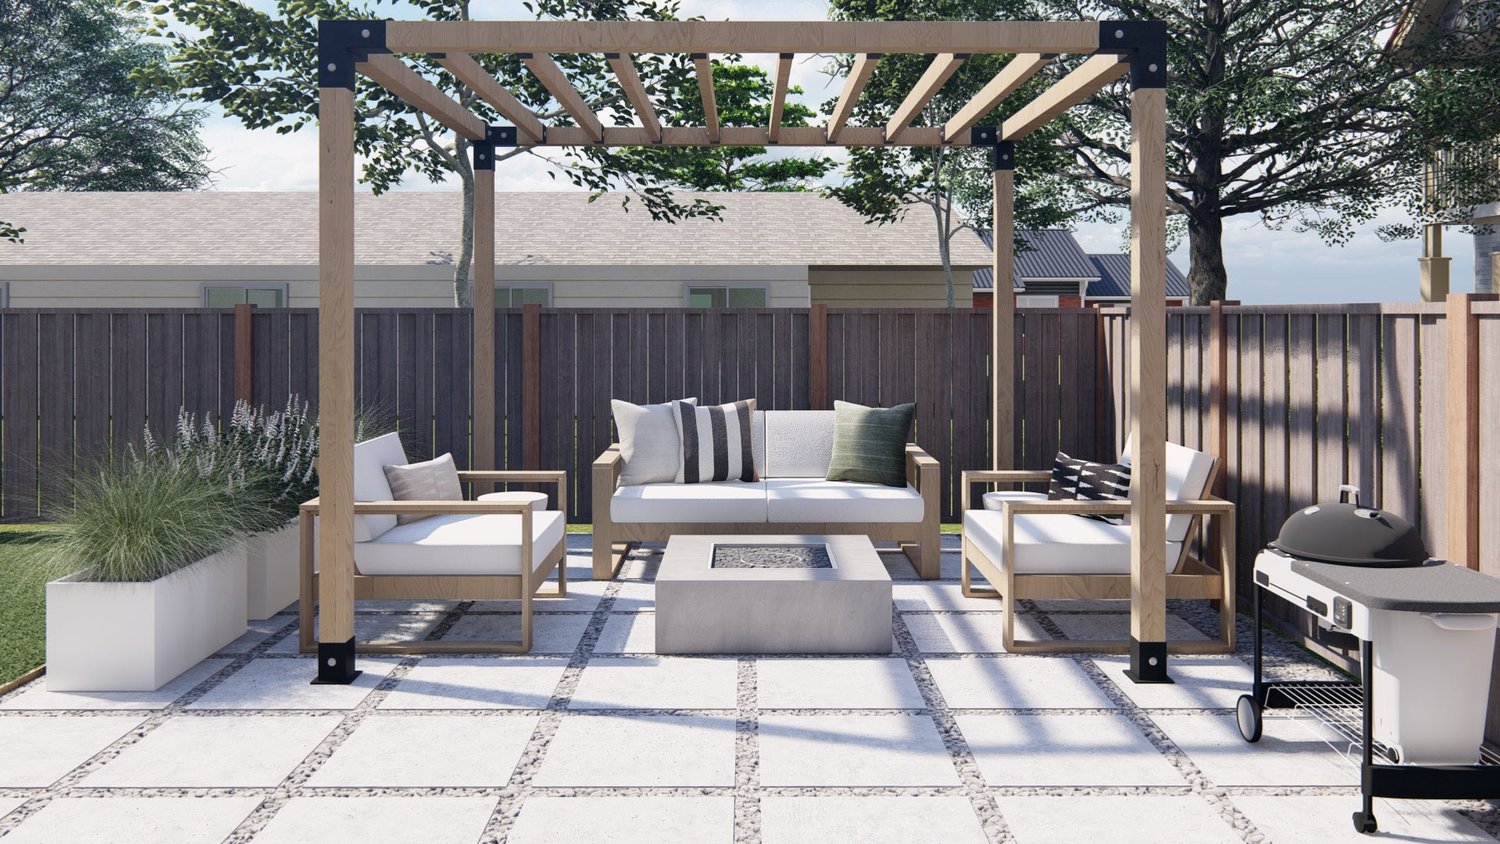 San Francisco backyard showing concrete paver patio and outdoor kitchen, with pergola over fire pit seating area